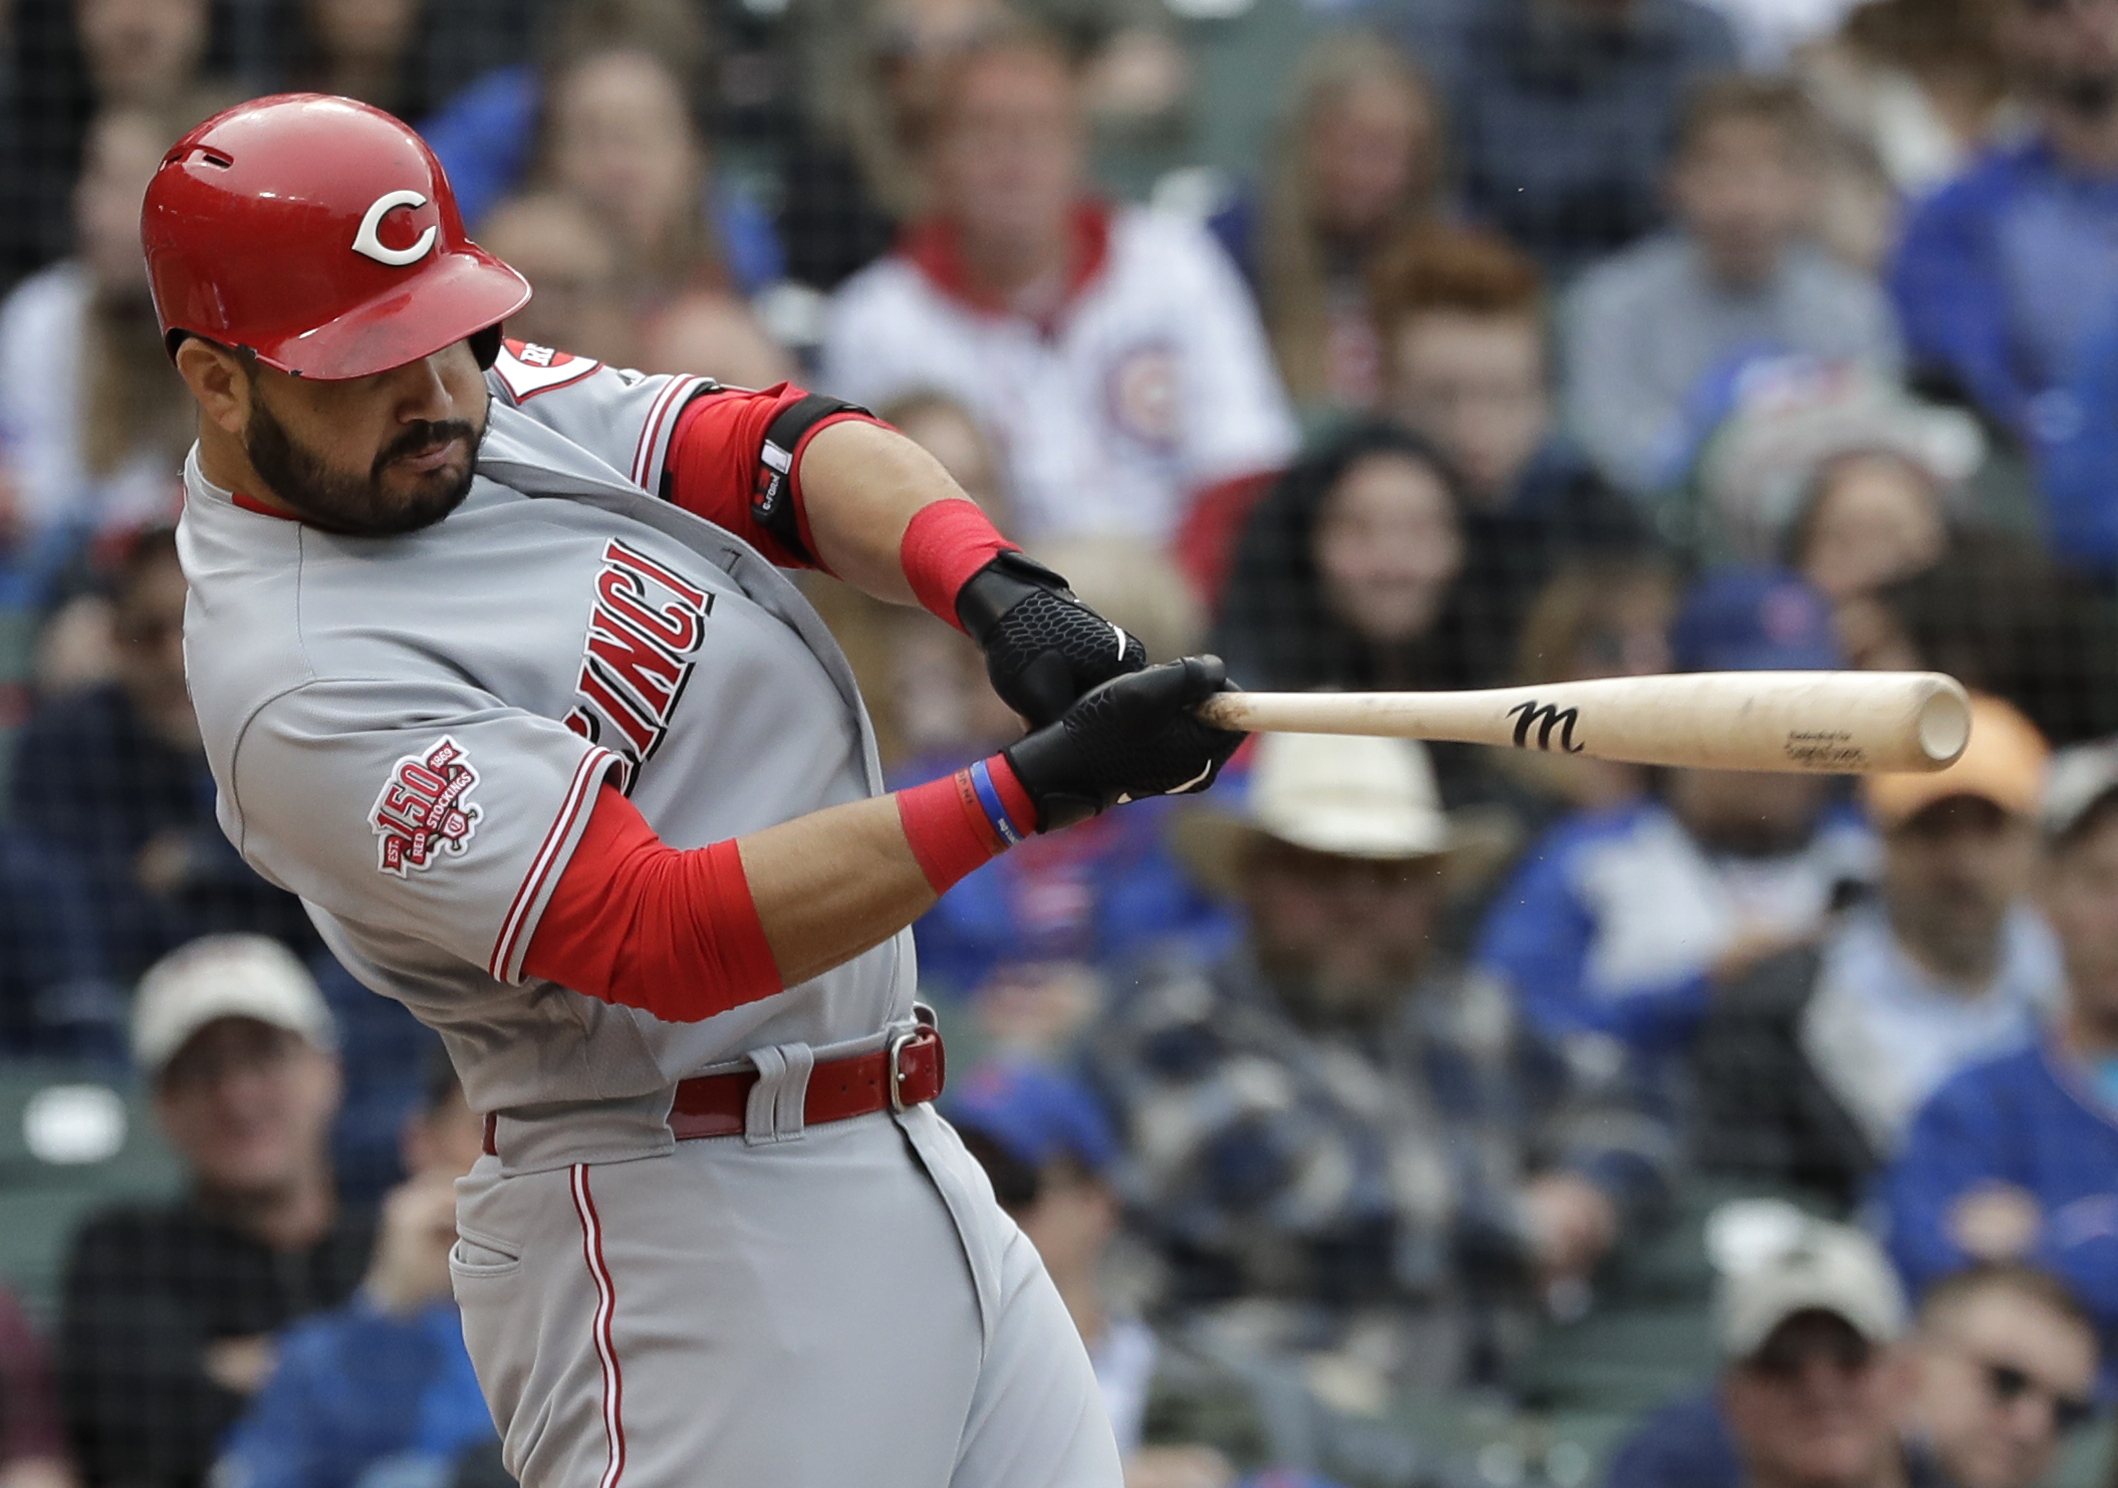 Suárez hits 2-run homer in 9th as Reds beat Cubs 6-5